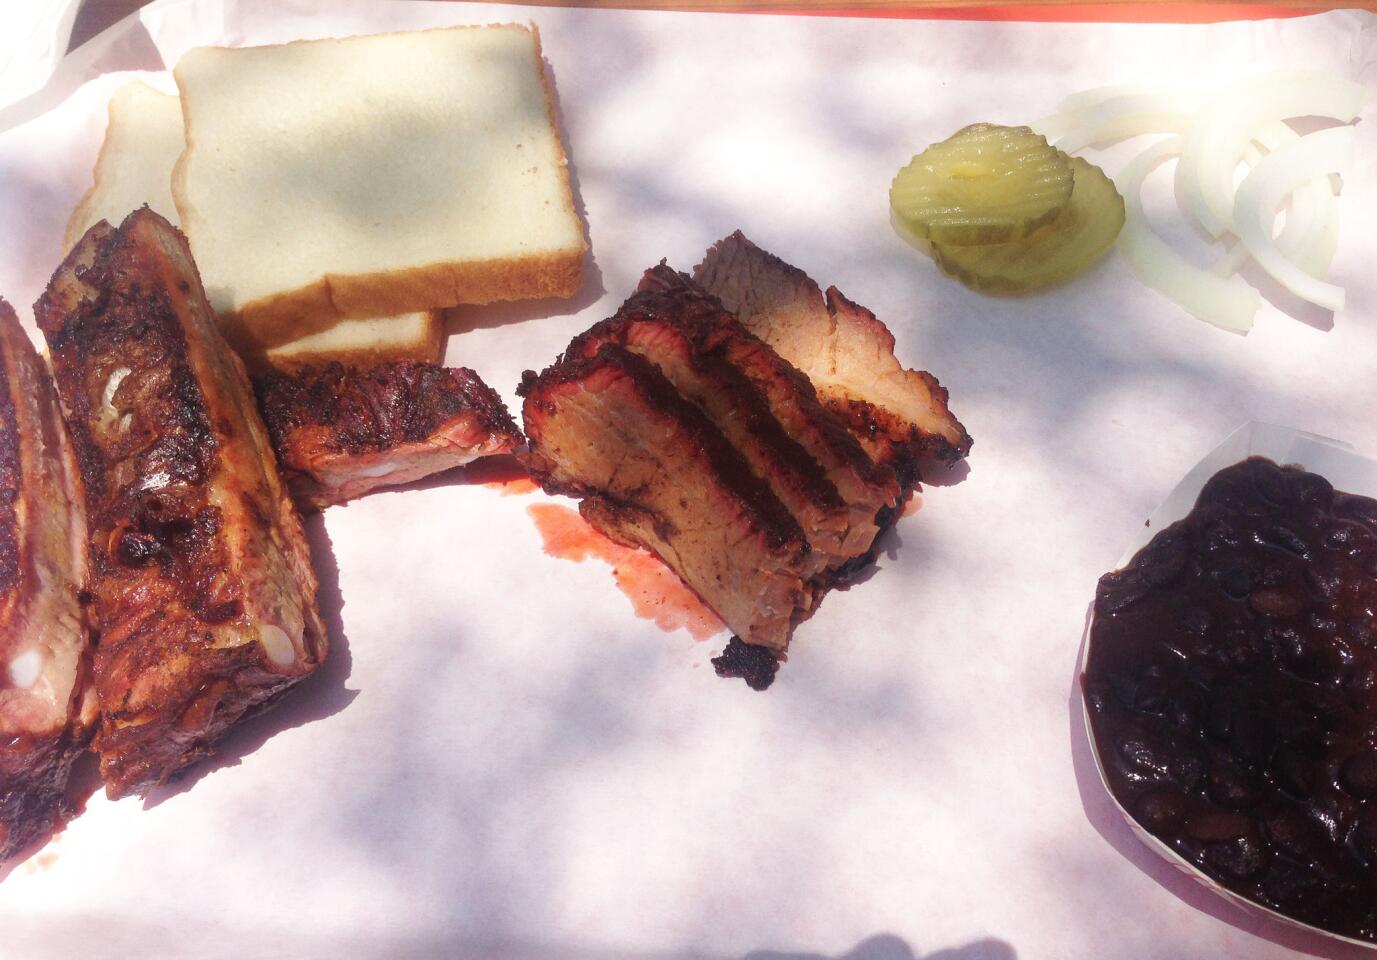 Barbecued meat and slices of white bread from Horse Thief at Grand Central Market.